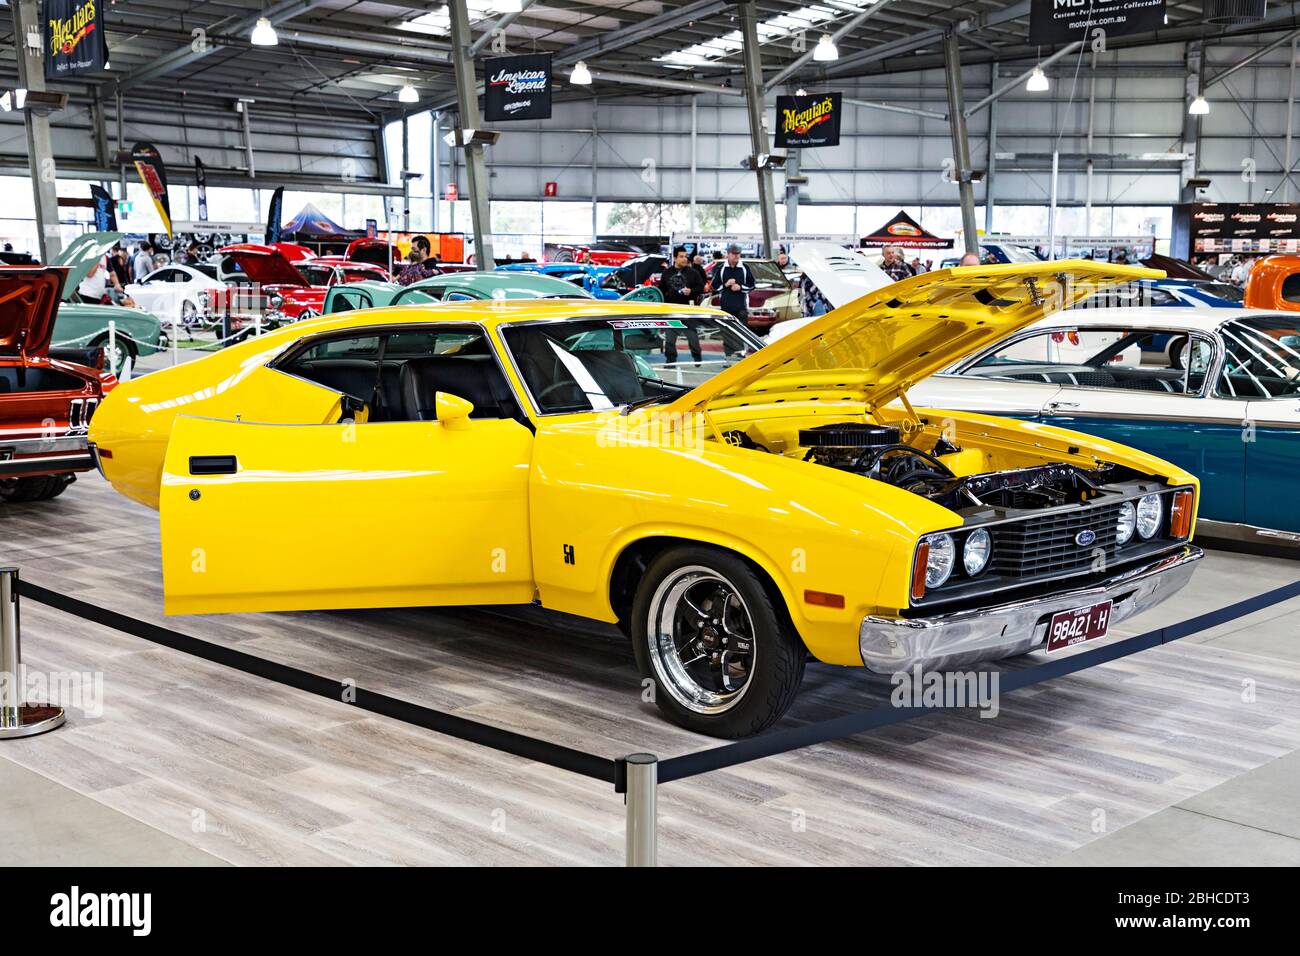 Automobiles /  Australian made 1970 Ford Falcon XA Coupe displayed at a motor show in Melbourne Victoria Australia.The vehicle features a Cleveland 35 Stock Photo